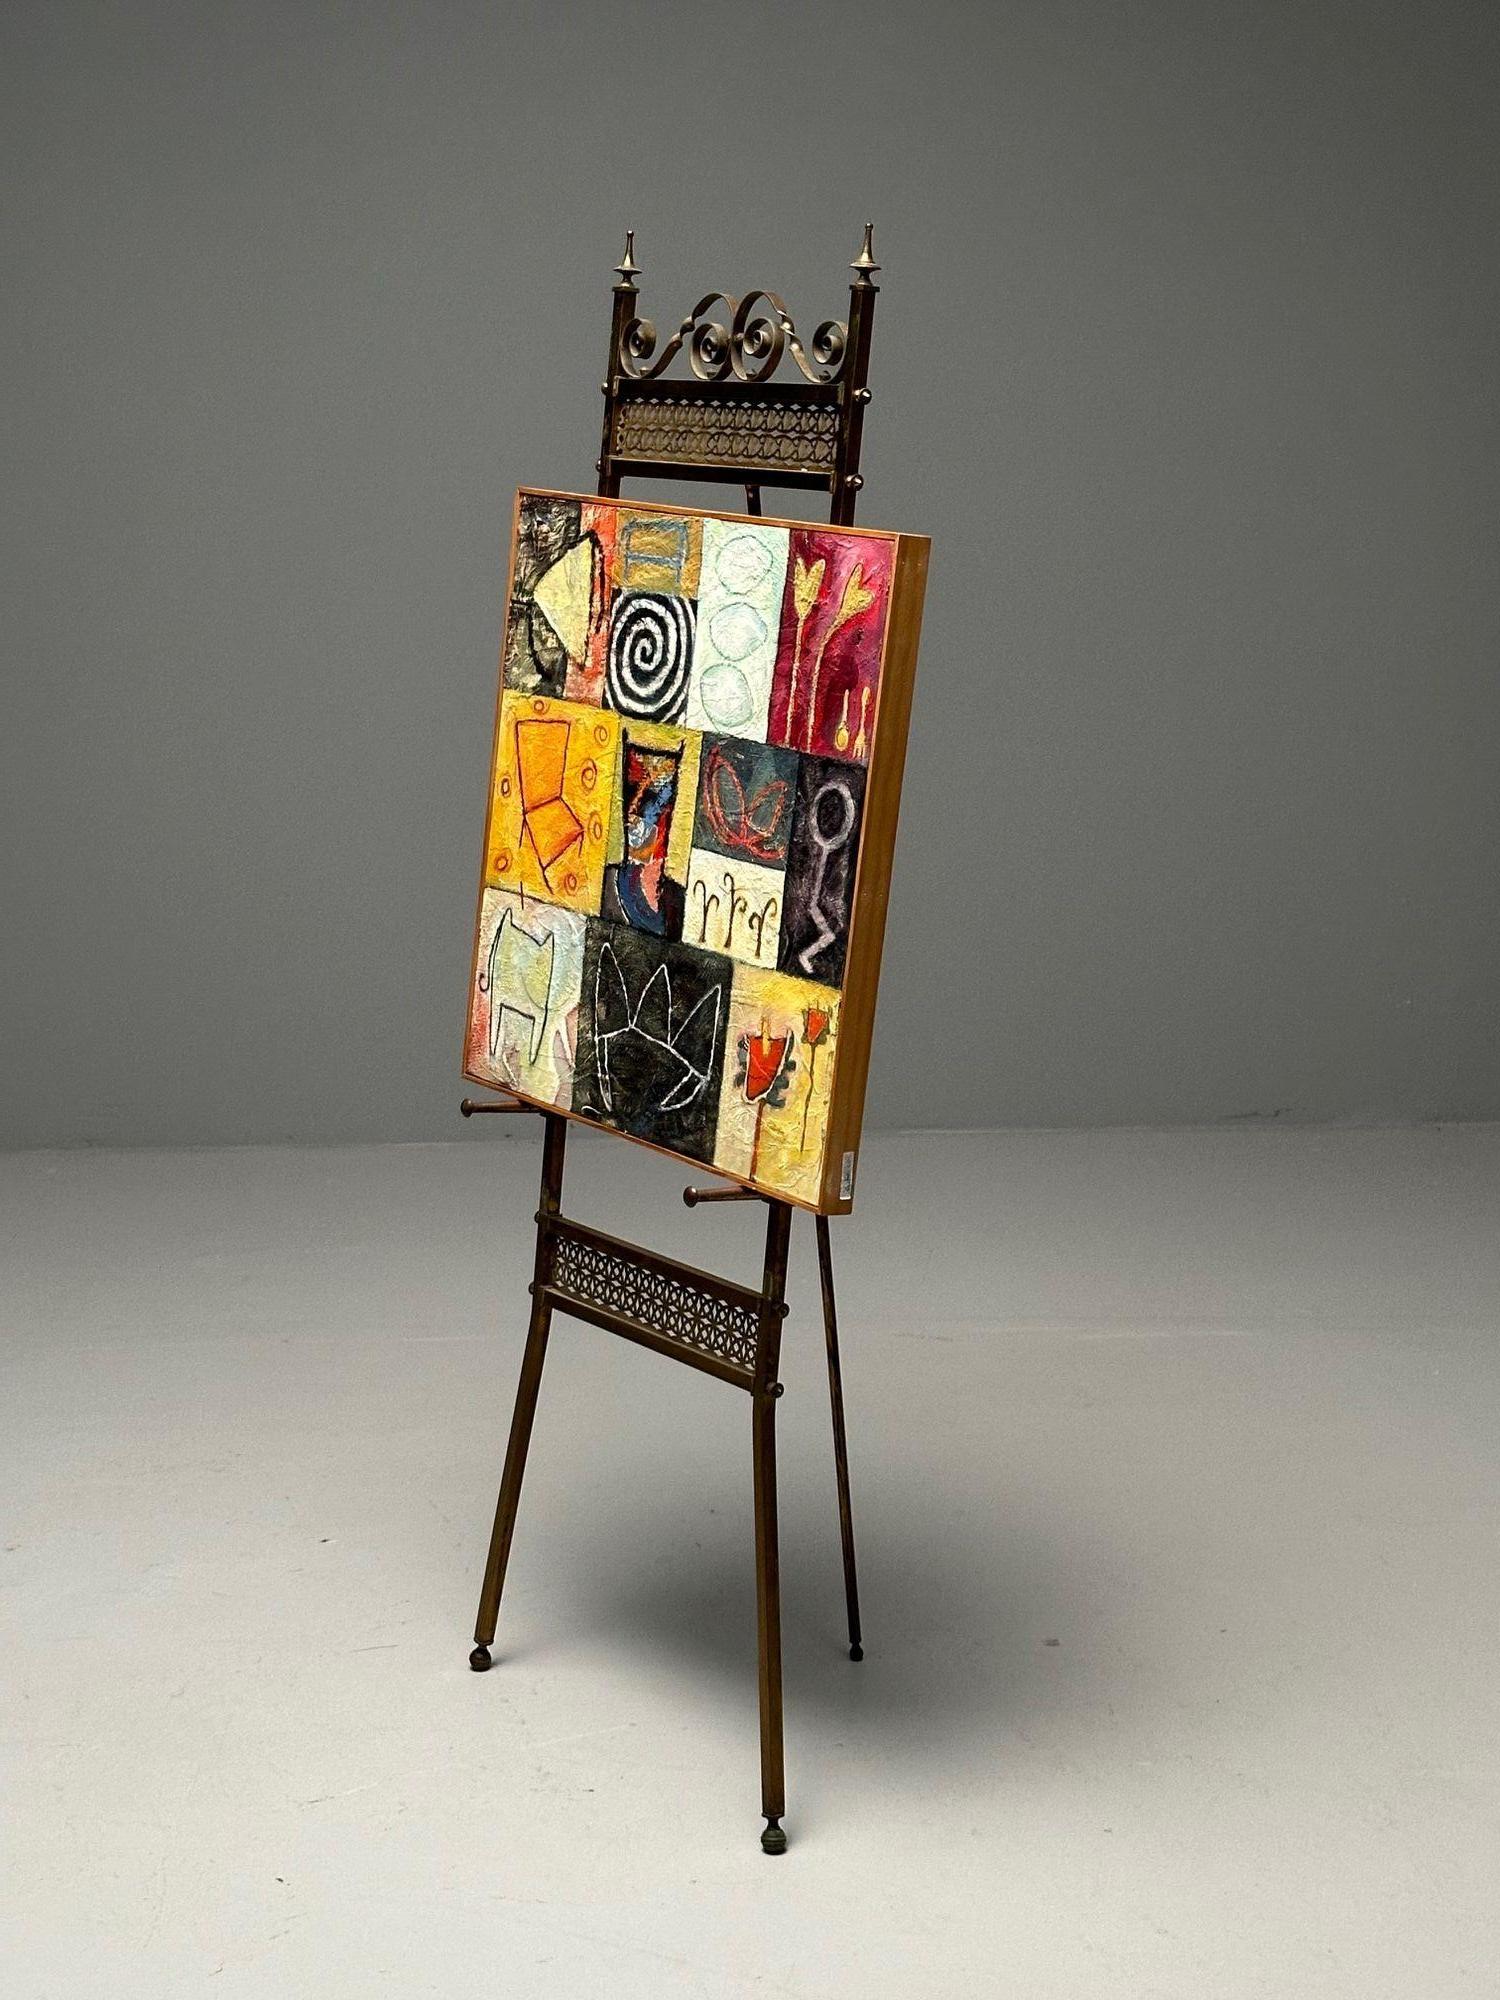 French Neoclassical, Antique Standing Easel, Bronze, France, 1940s

A highly patinated standing easel in the French neoclassical tase. Likely designed and produced in Franca circa 1940s.

H61